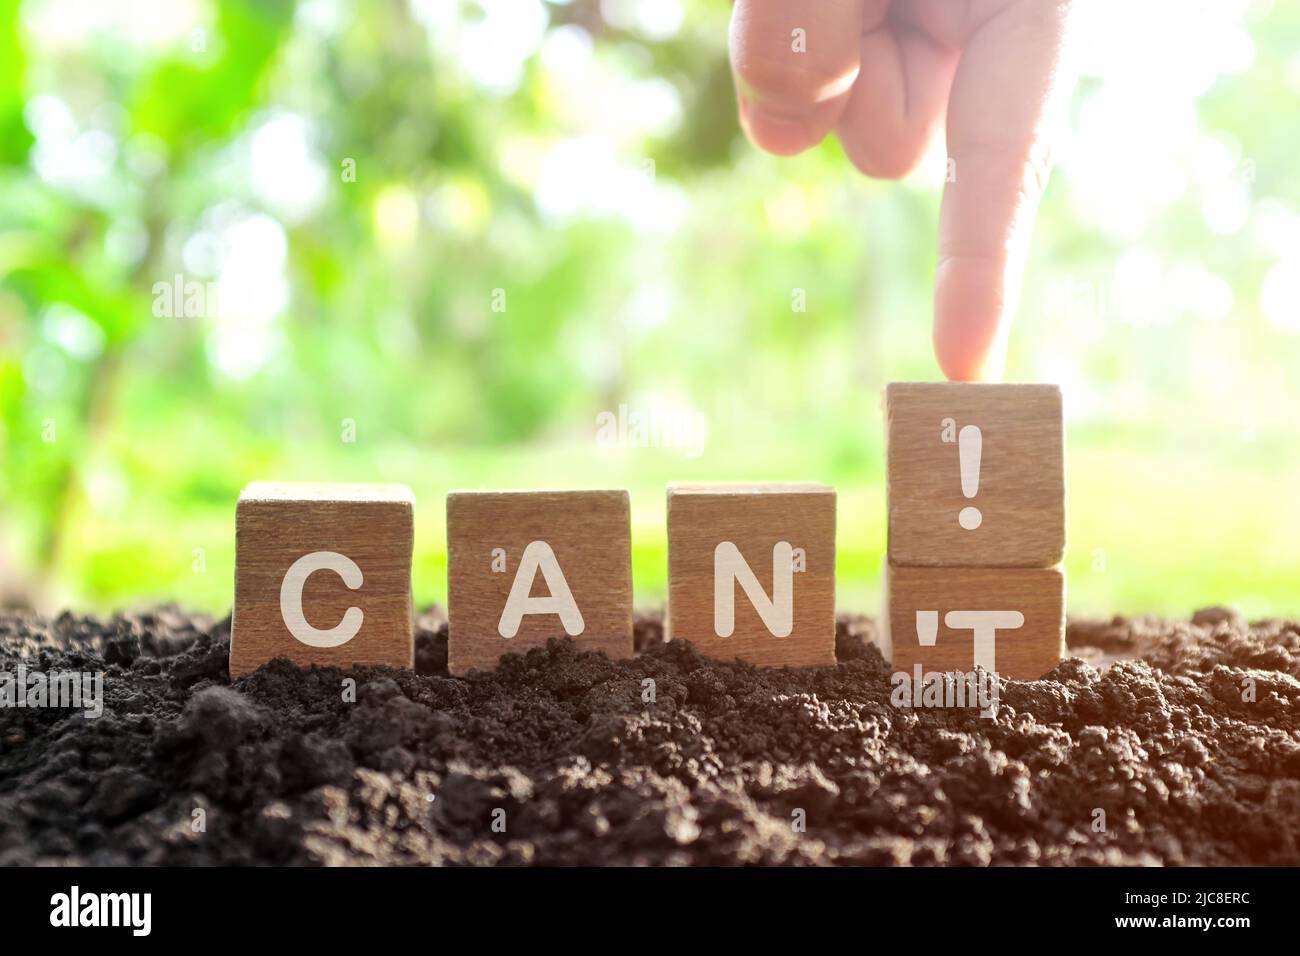 Self motivation and positive thinking concept. Hand changing wooden blocks letters from can't to can. Stock Photo